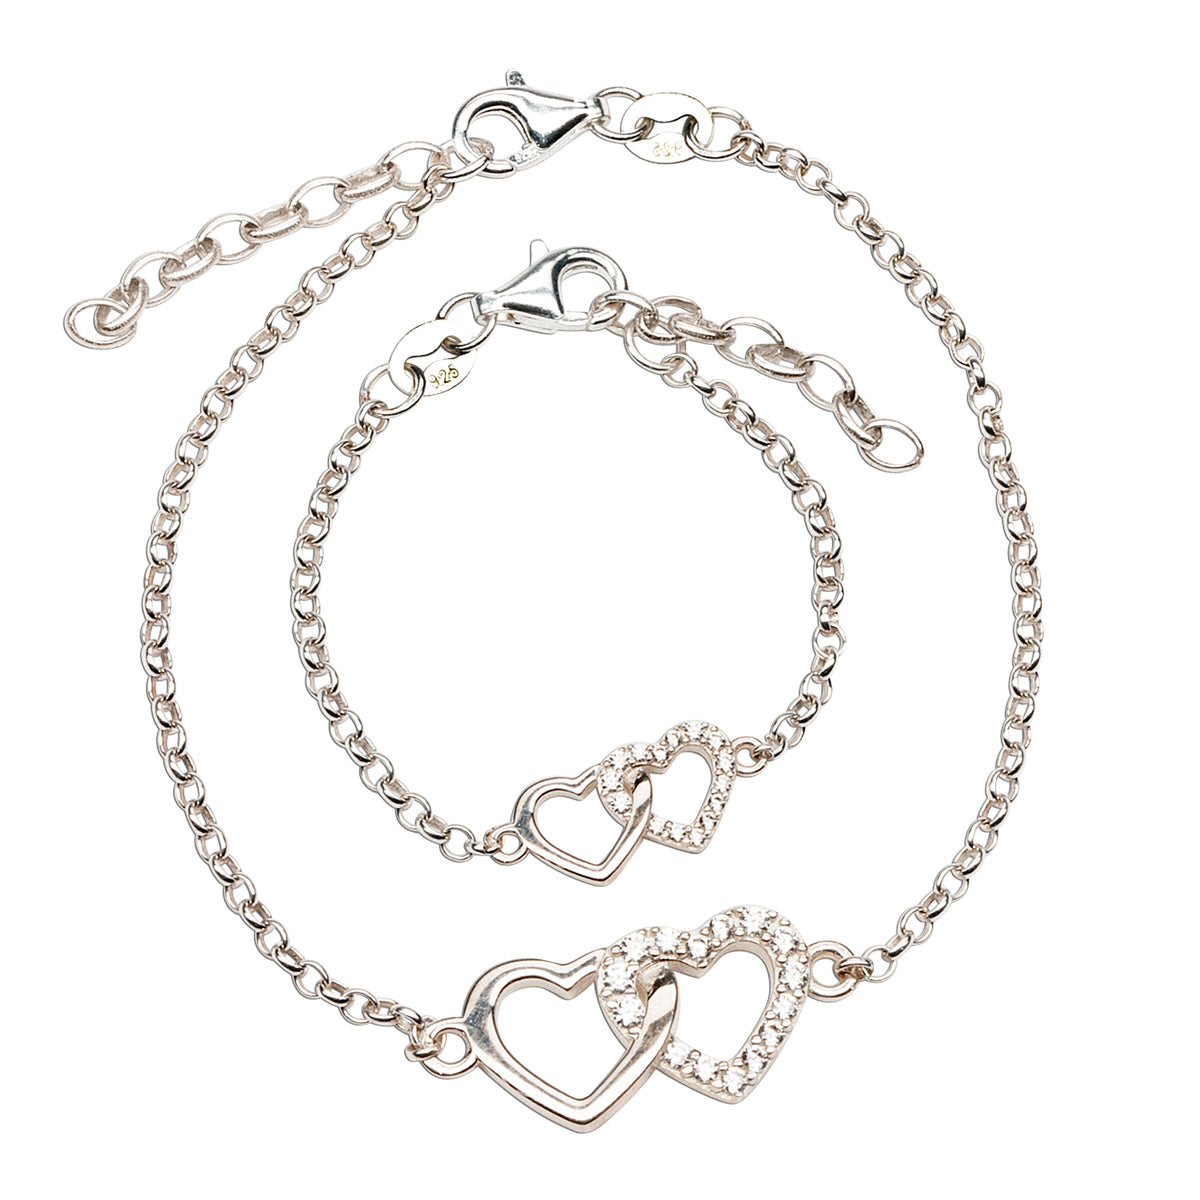 Personalized Sterling Silver Charm Bracelet for Kids, Teens, or Women –  Cherished Moments Jewelry